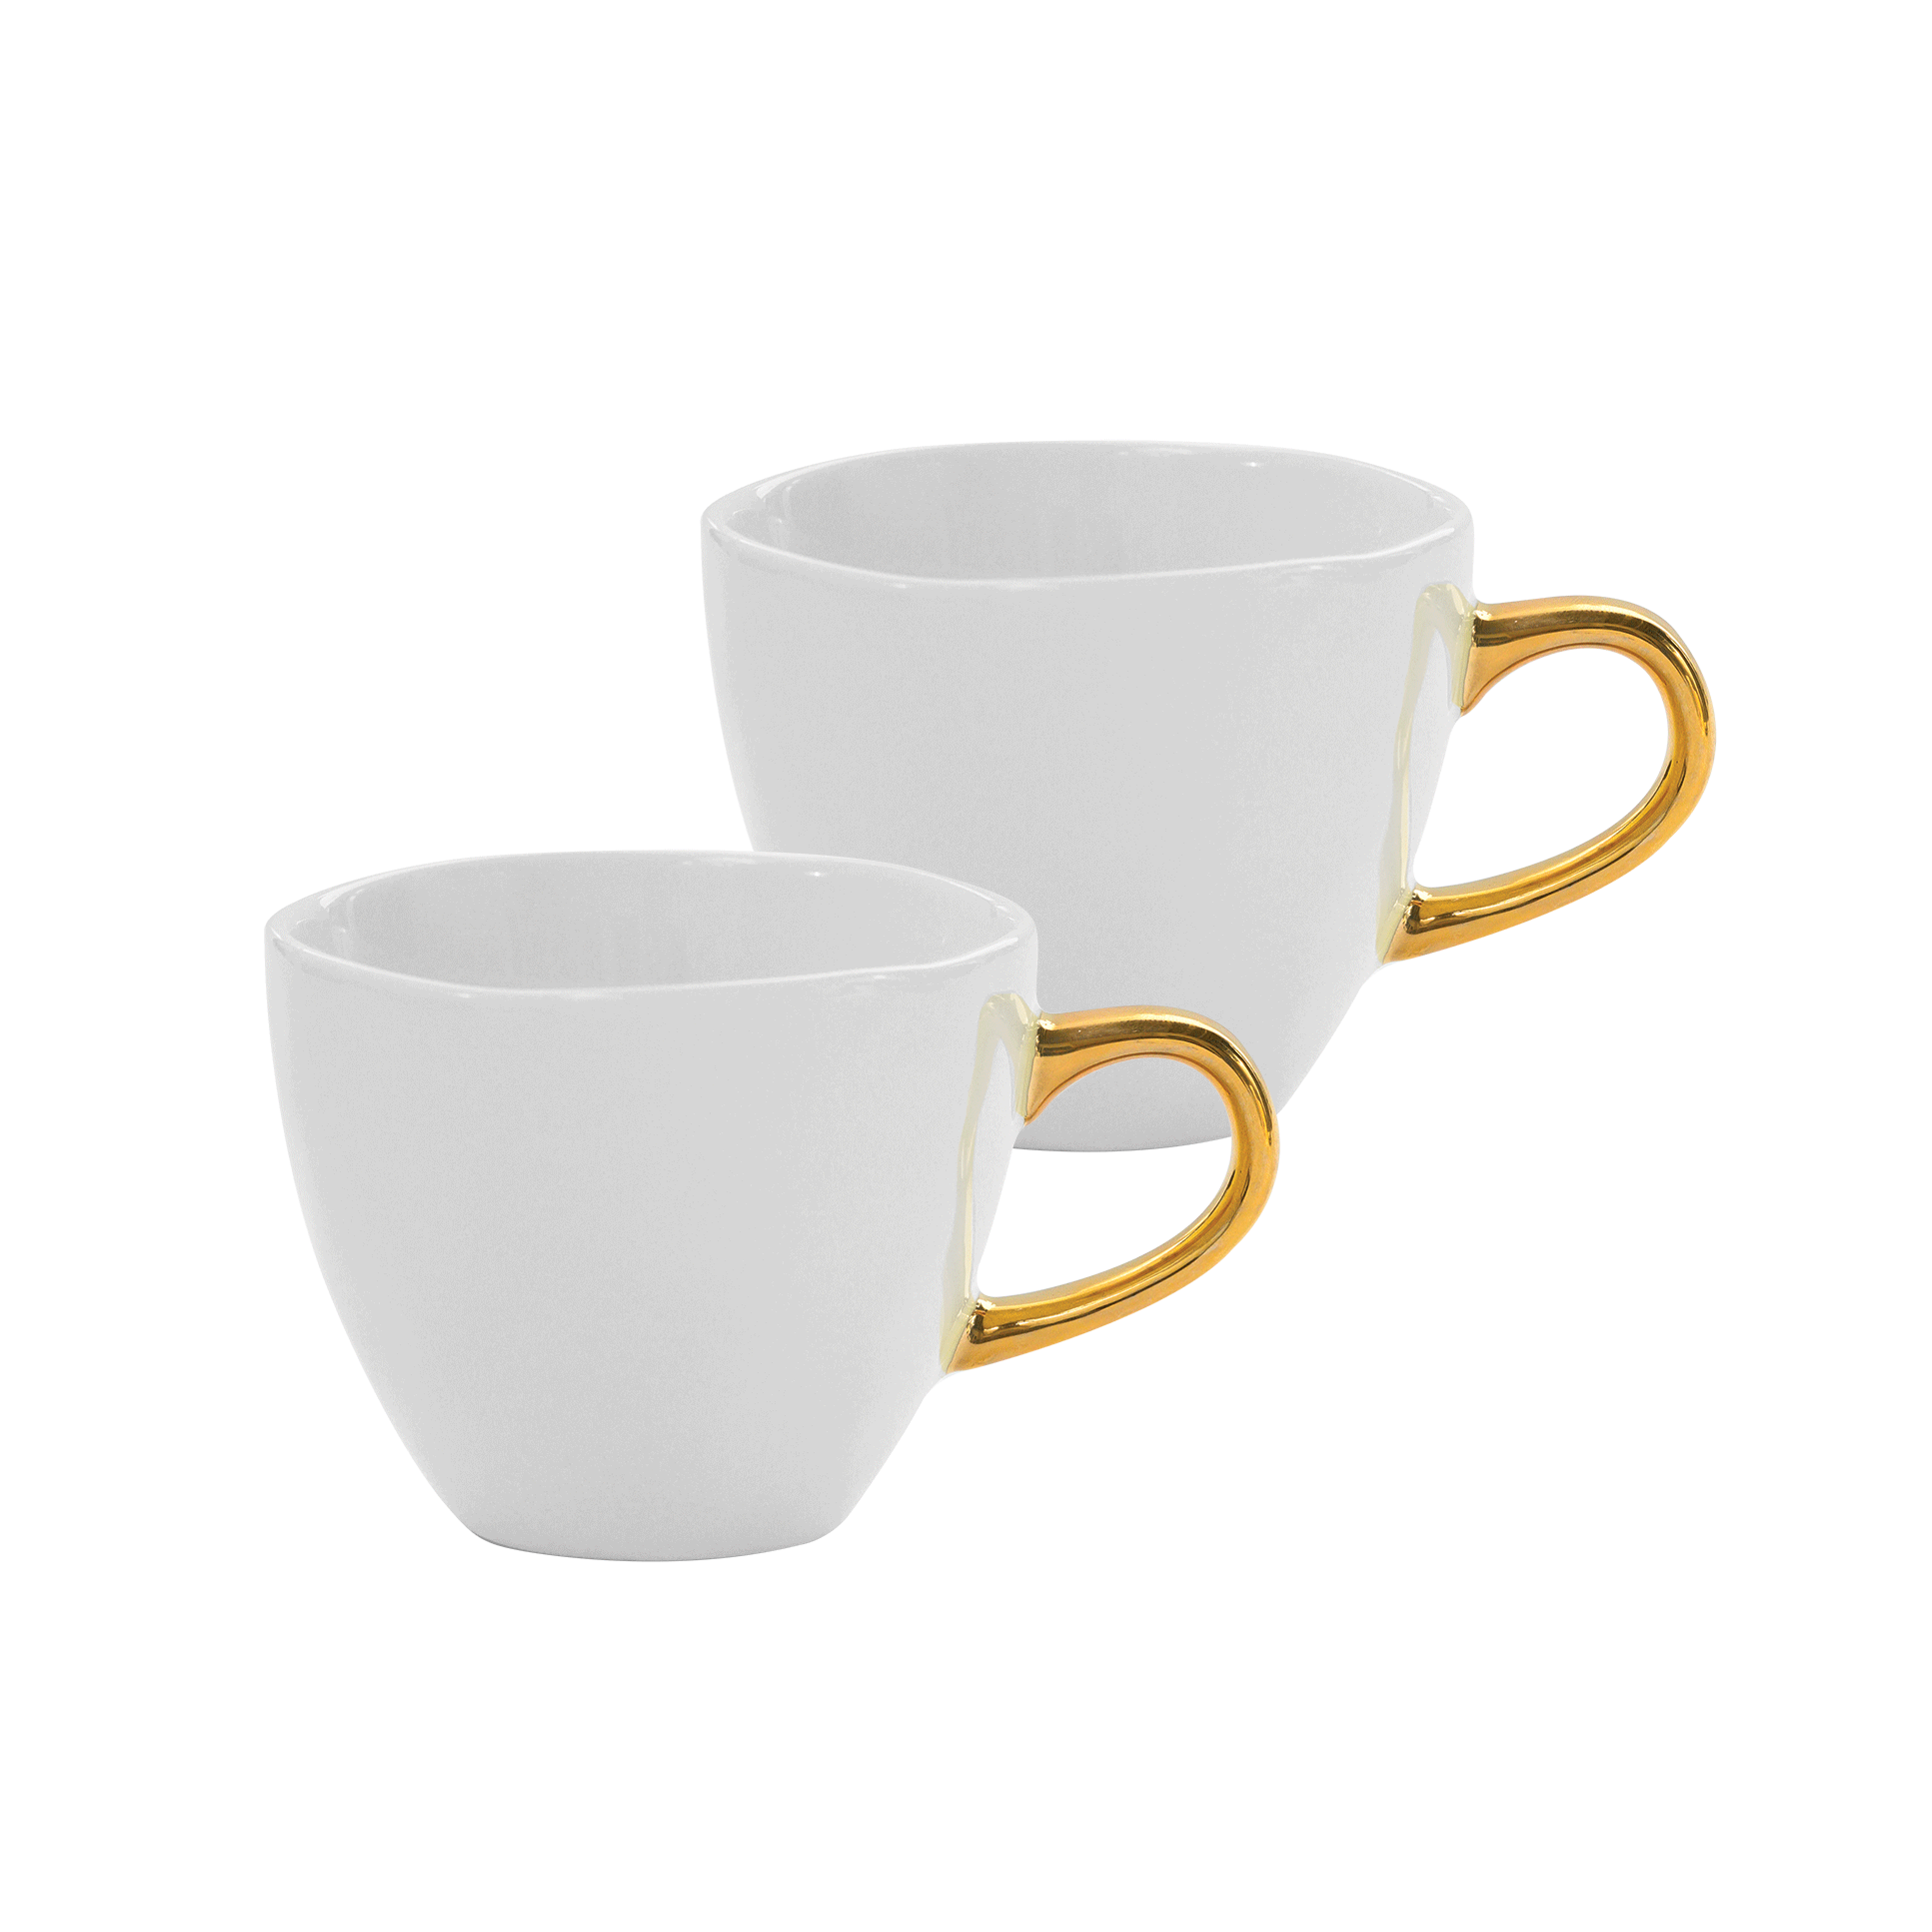 Urban Nature Culture Good Morning Cup Mini -  Set of 2 Giftpack White